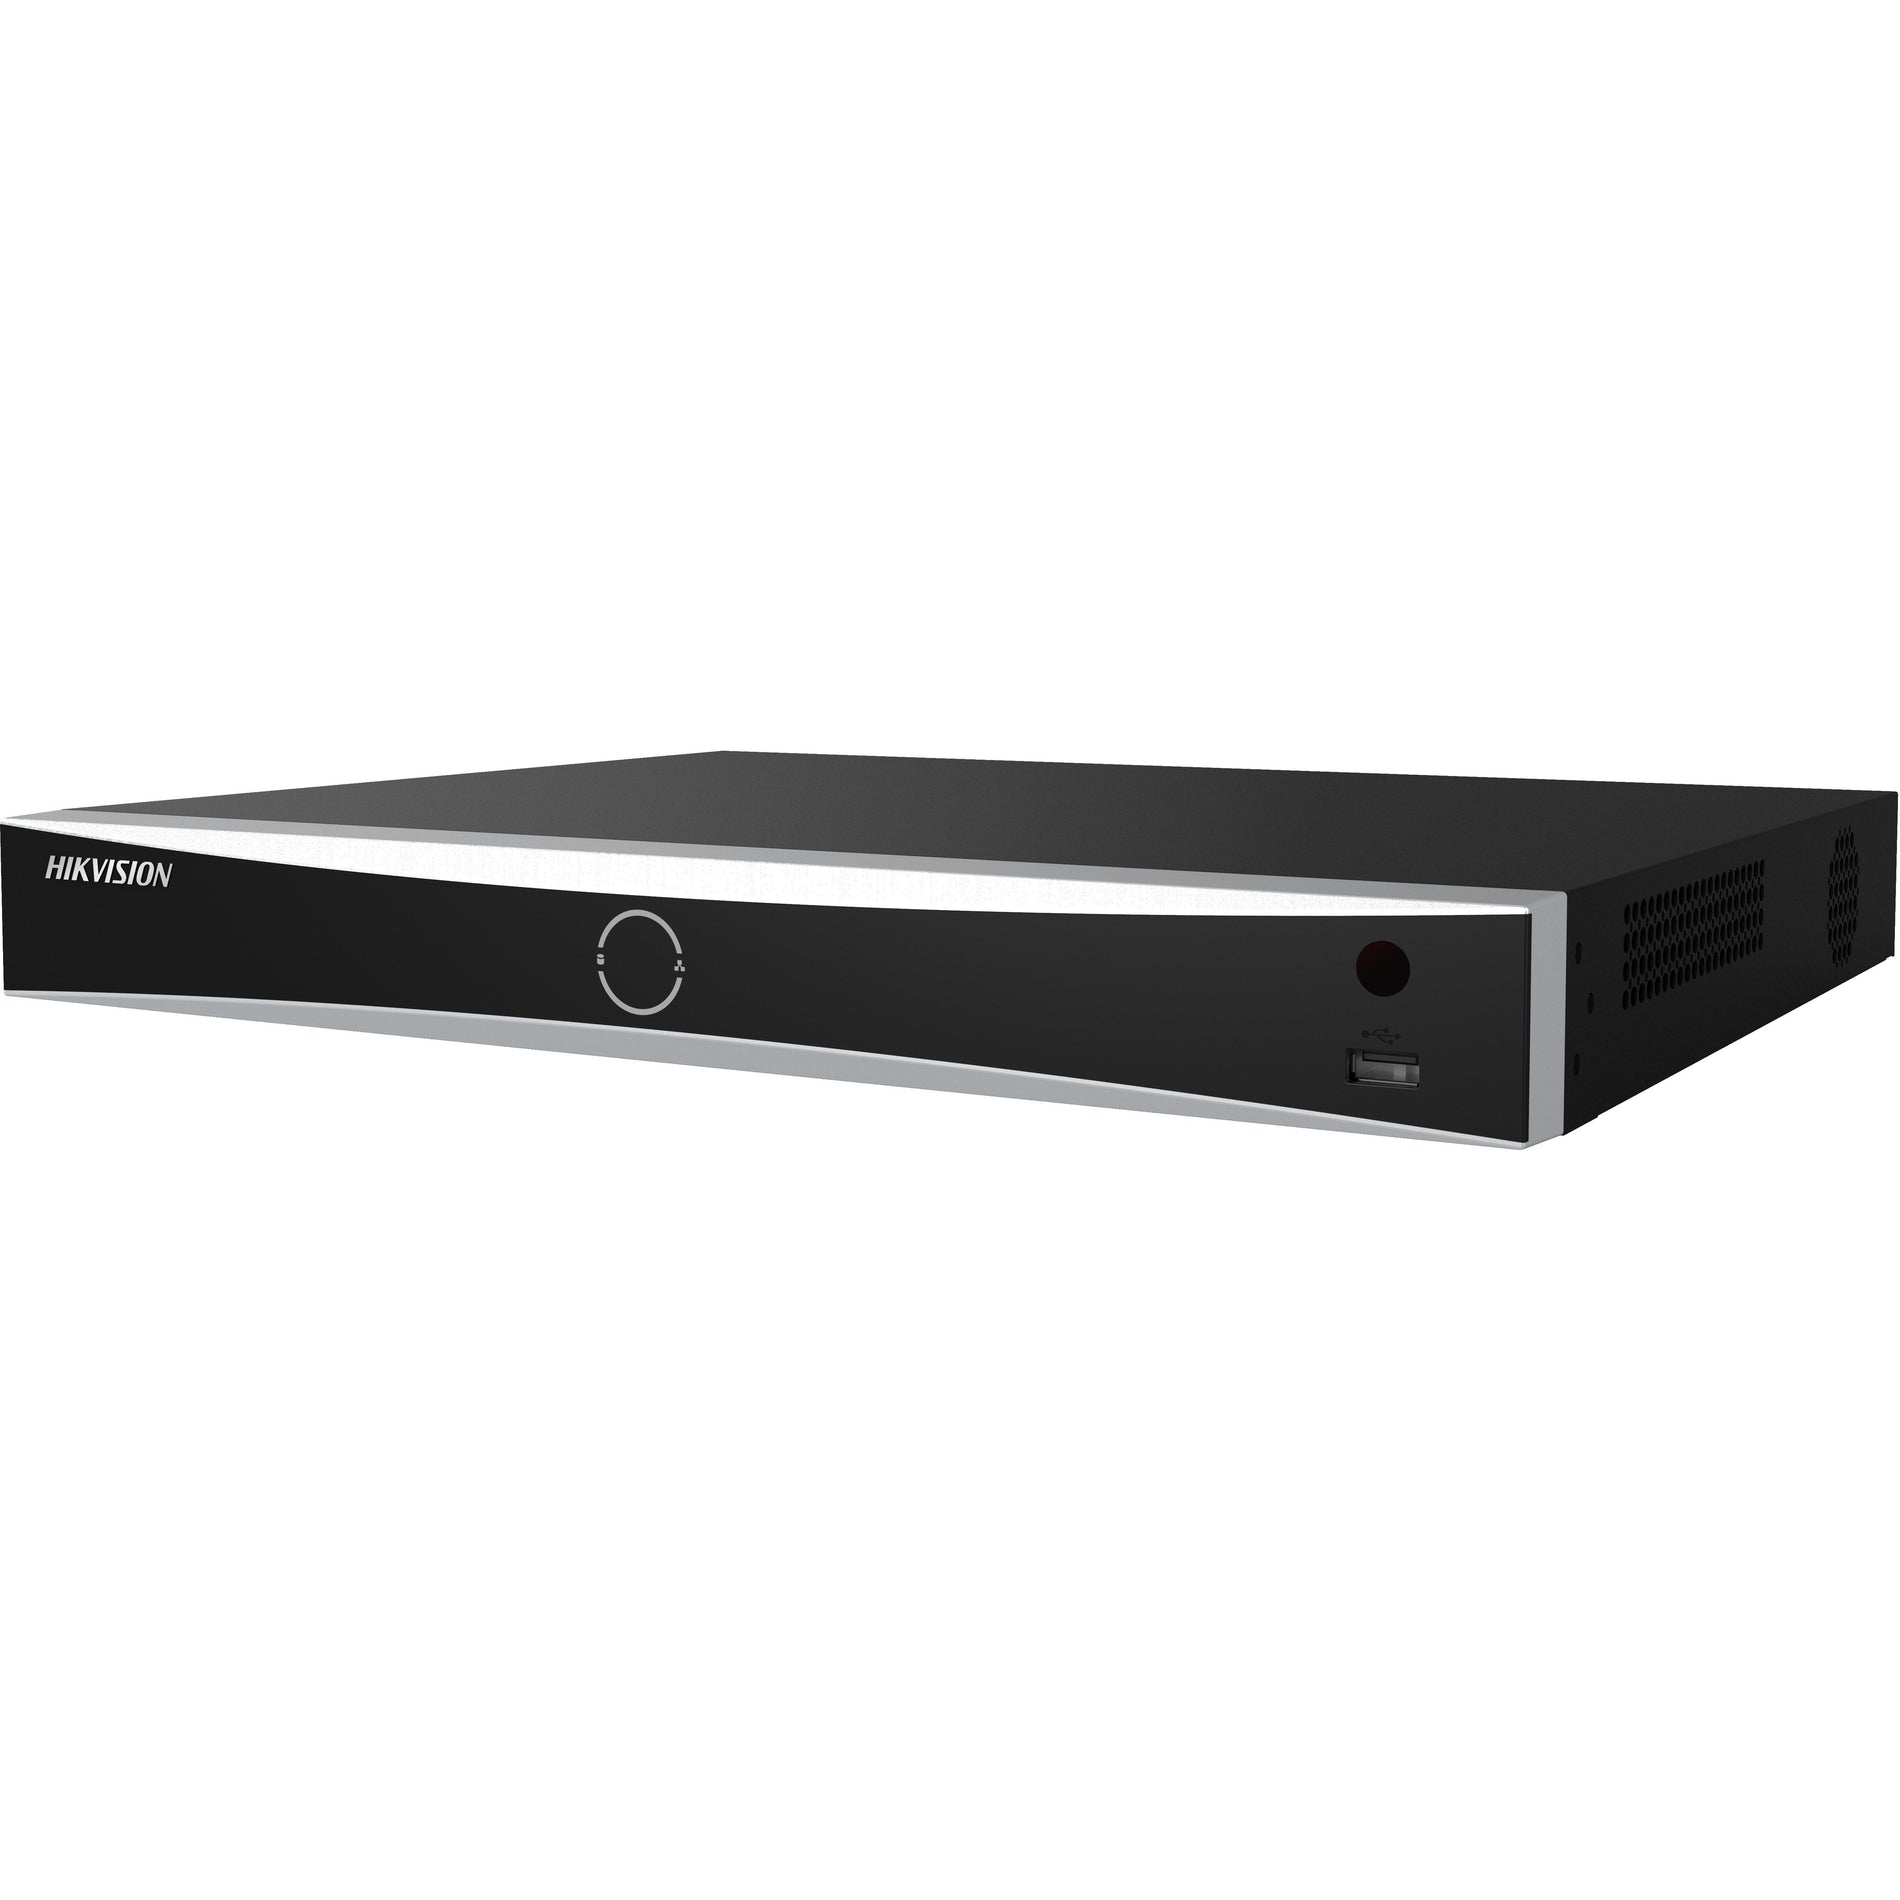 Hikvision DS-7608NXI-K2/8P-2TB 8-channel Plug and Play Network Video Recorder with AcuSense, 2TB Storage